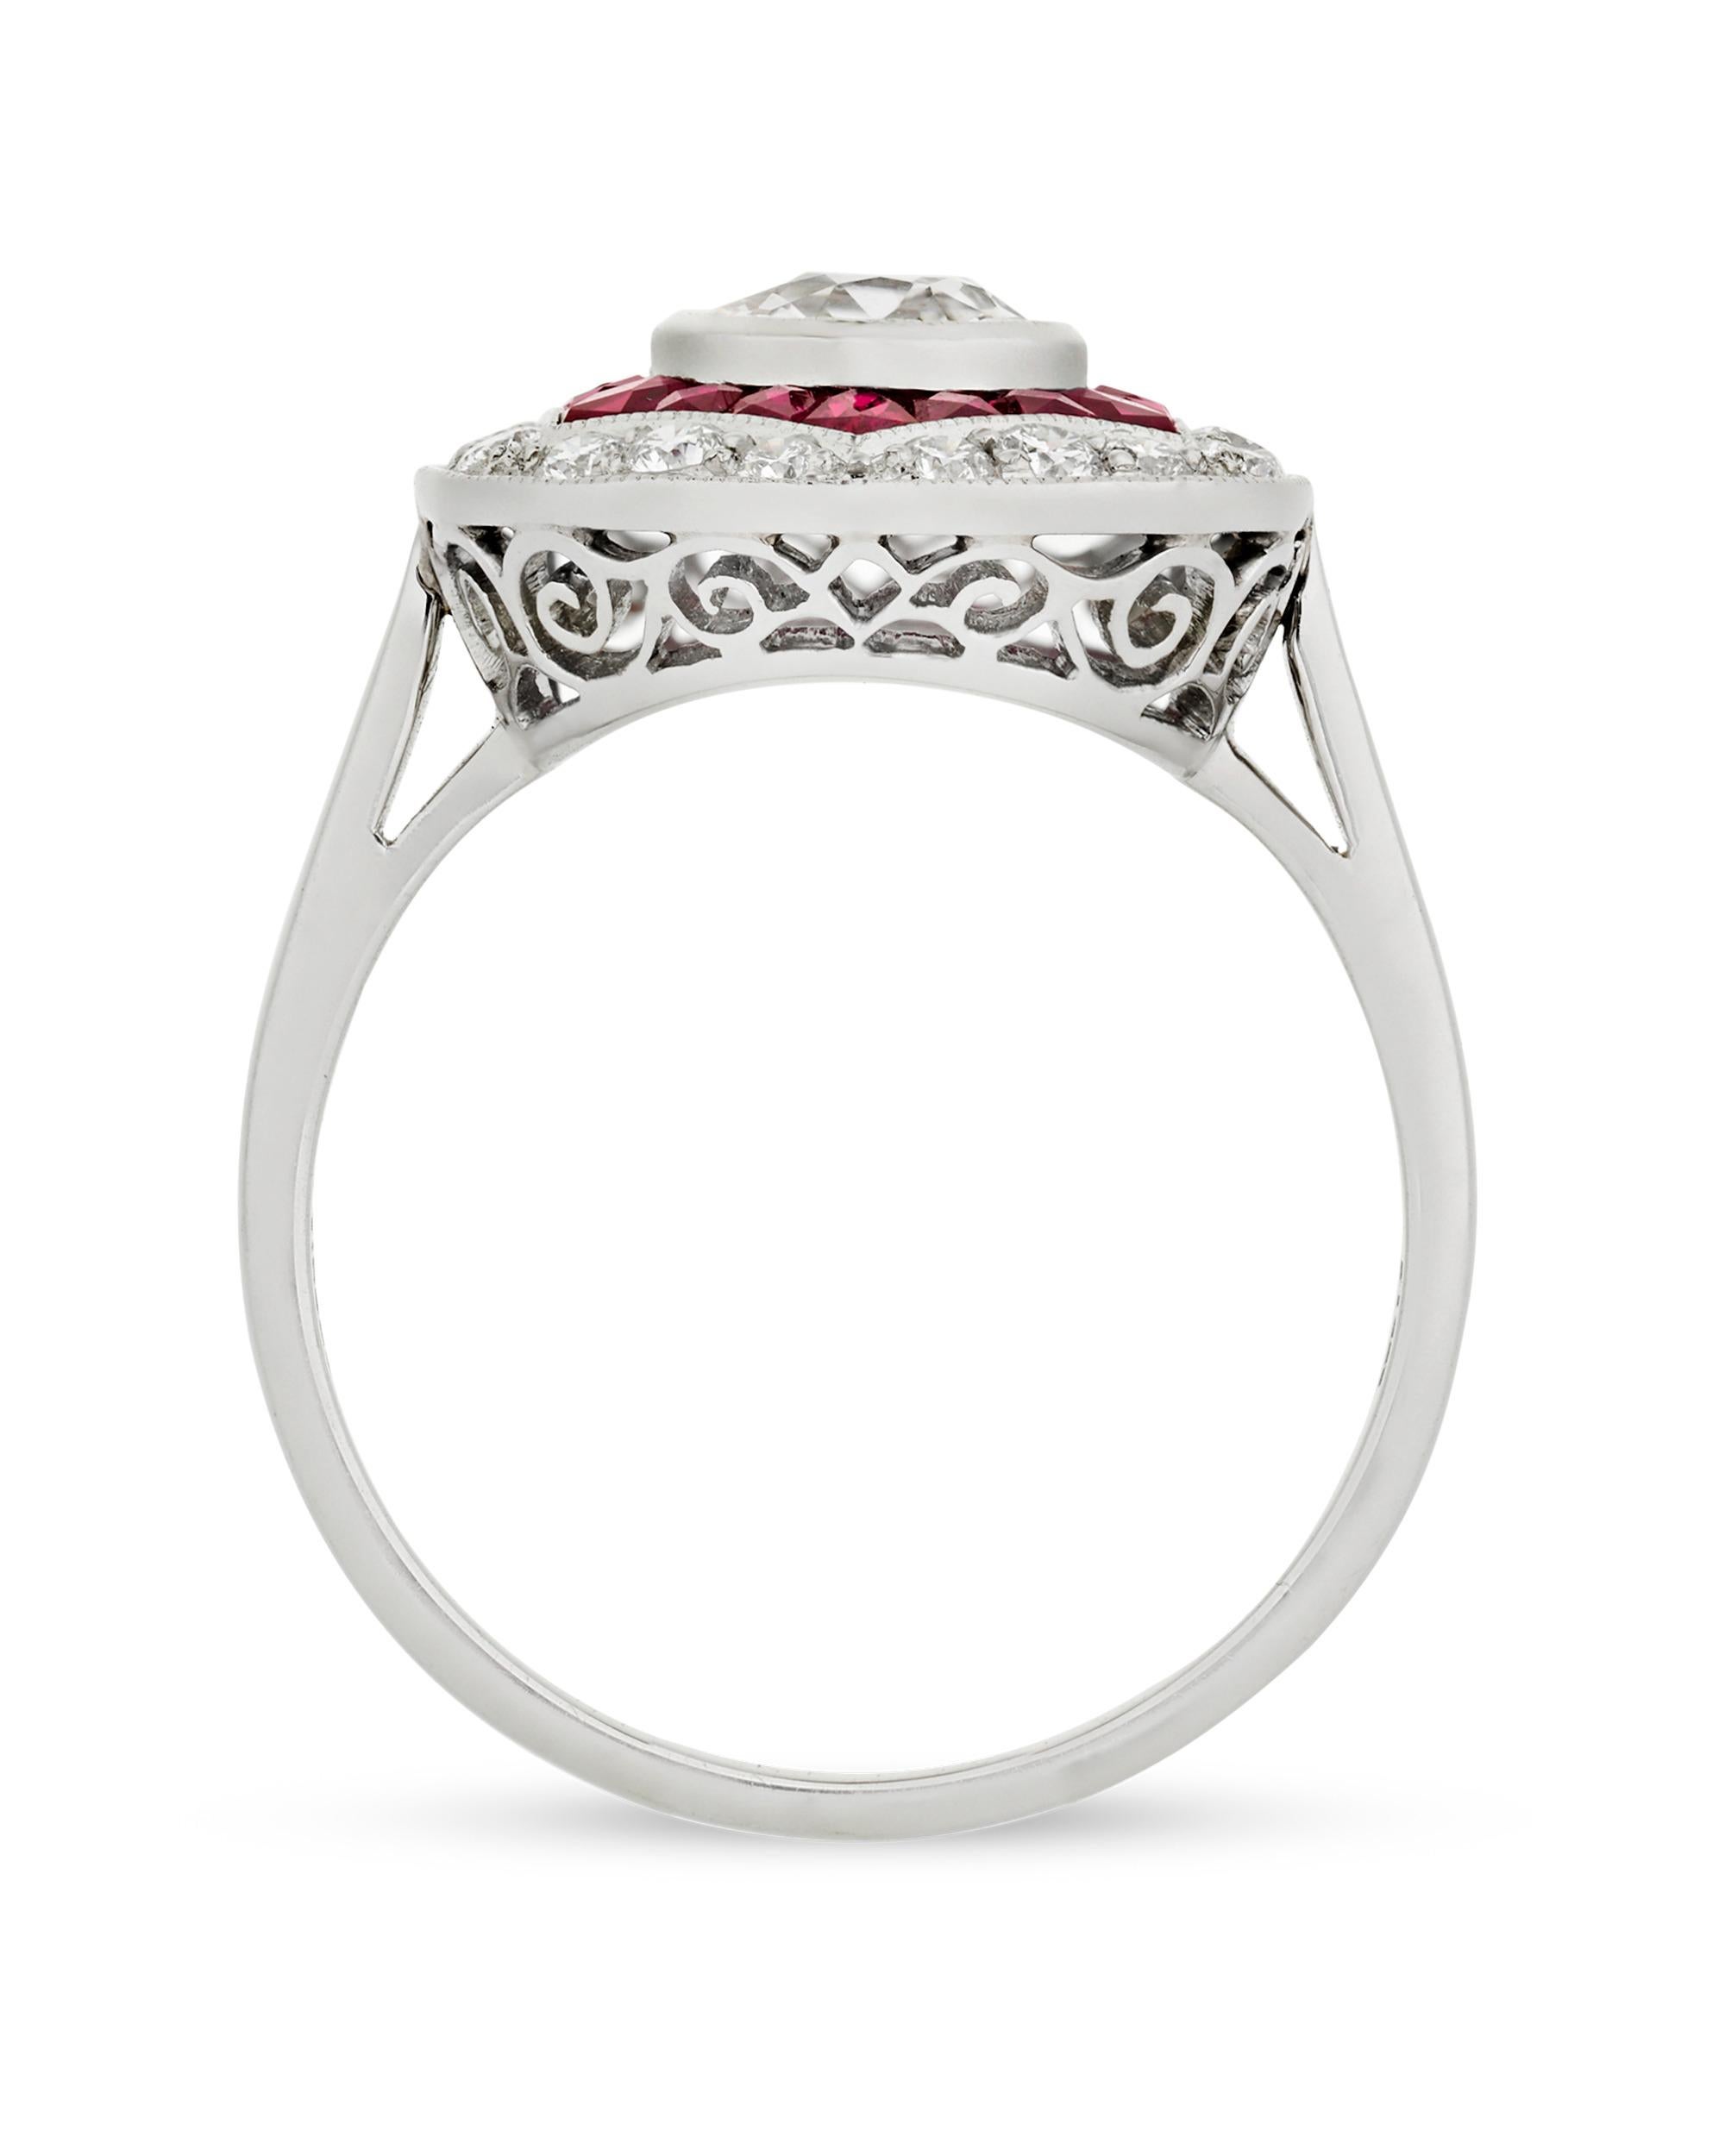 Art Deco-era elegance is beautifully reflected in this ruby and diamond platinum ring. The 0.82-carat round center diamond is boldly bordered by 1.57 total carats of ravishing red rubies and 0.33 additional carat of glistening diamonds. This